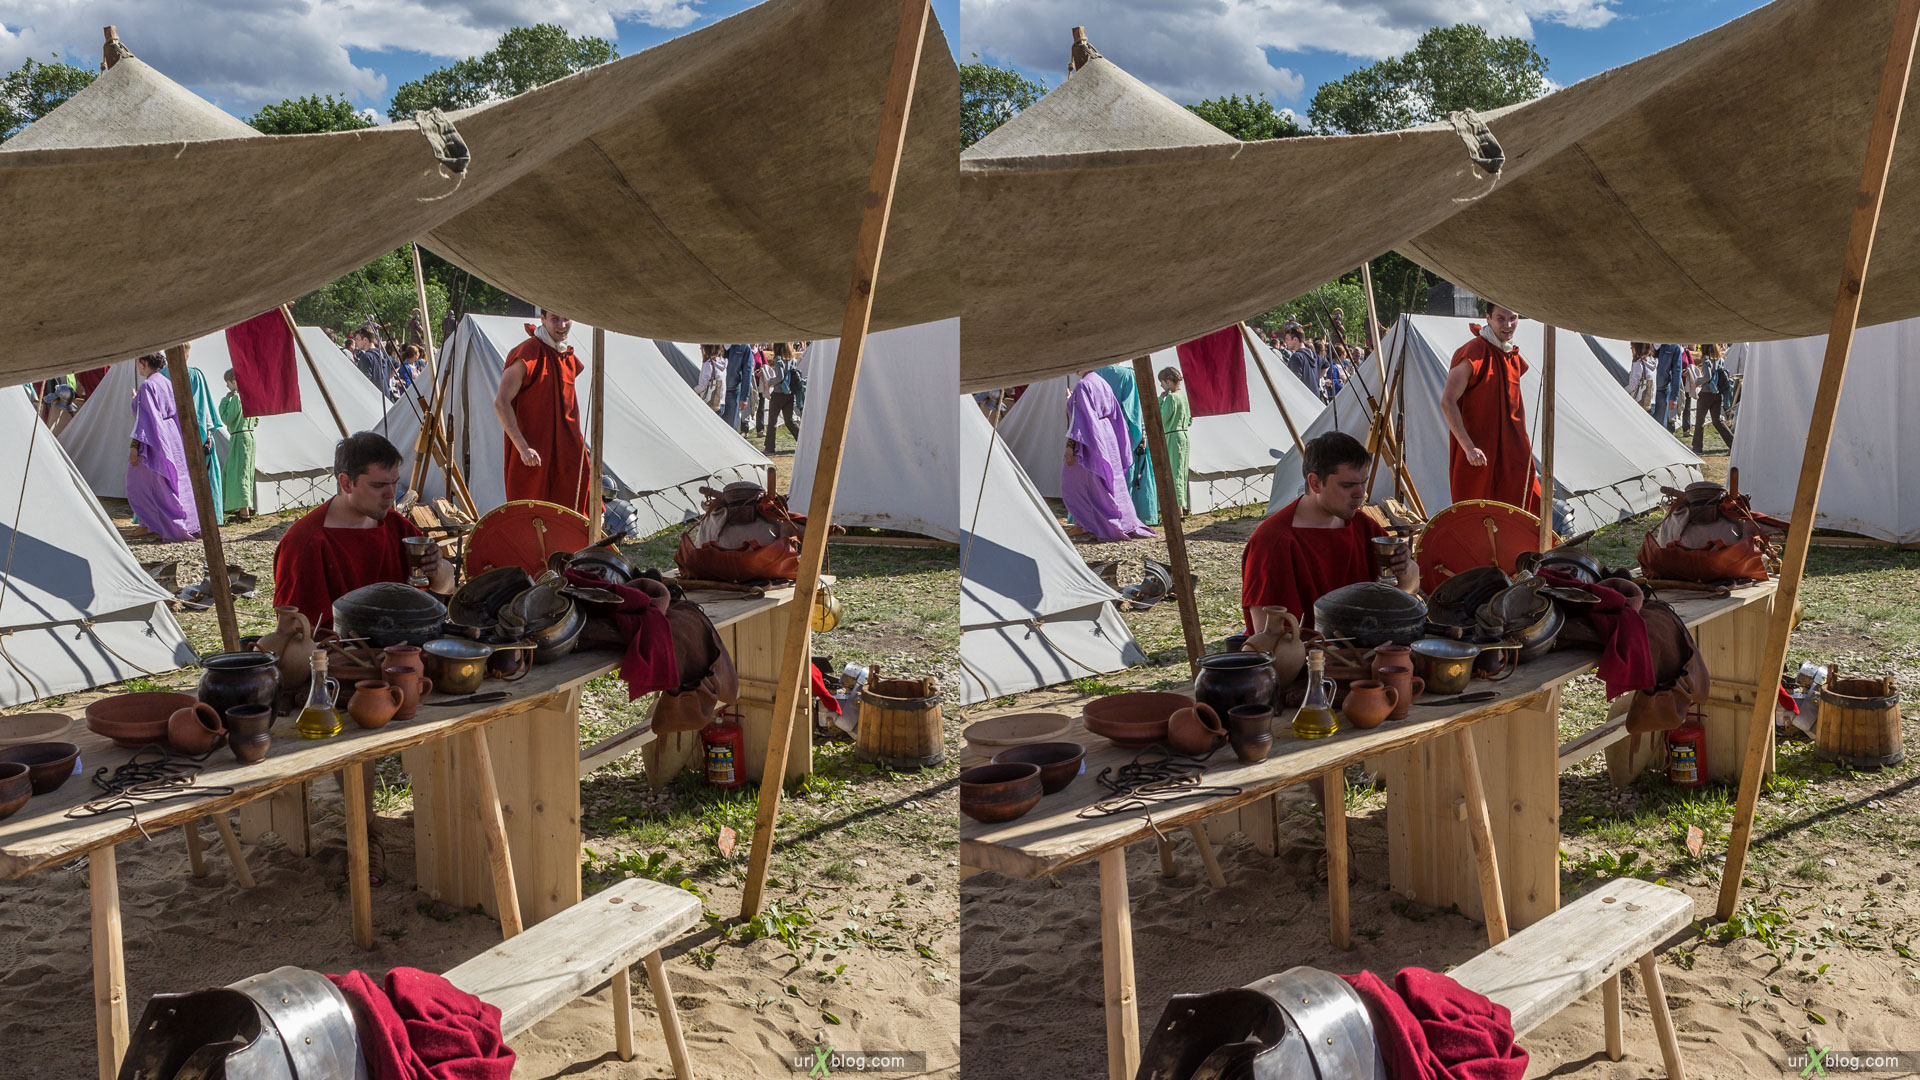 Times and Epochs, festival, Kolomenskoye park, Moscow, Russia, 3D, stereo pair, cross-eyed, crossview, cross view stereo pair, stereoscopic, 2015